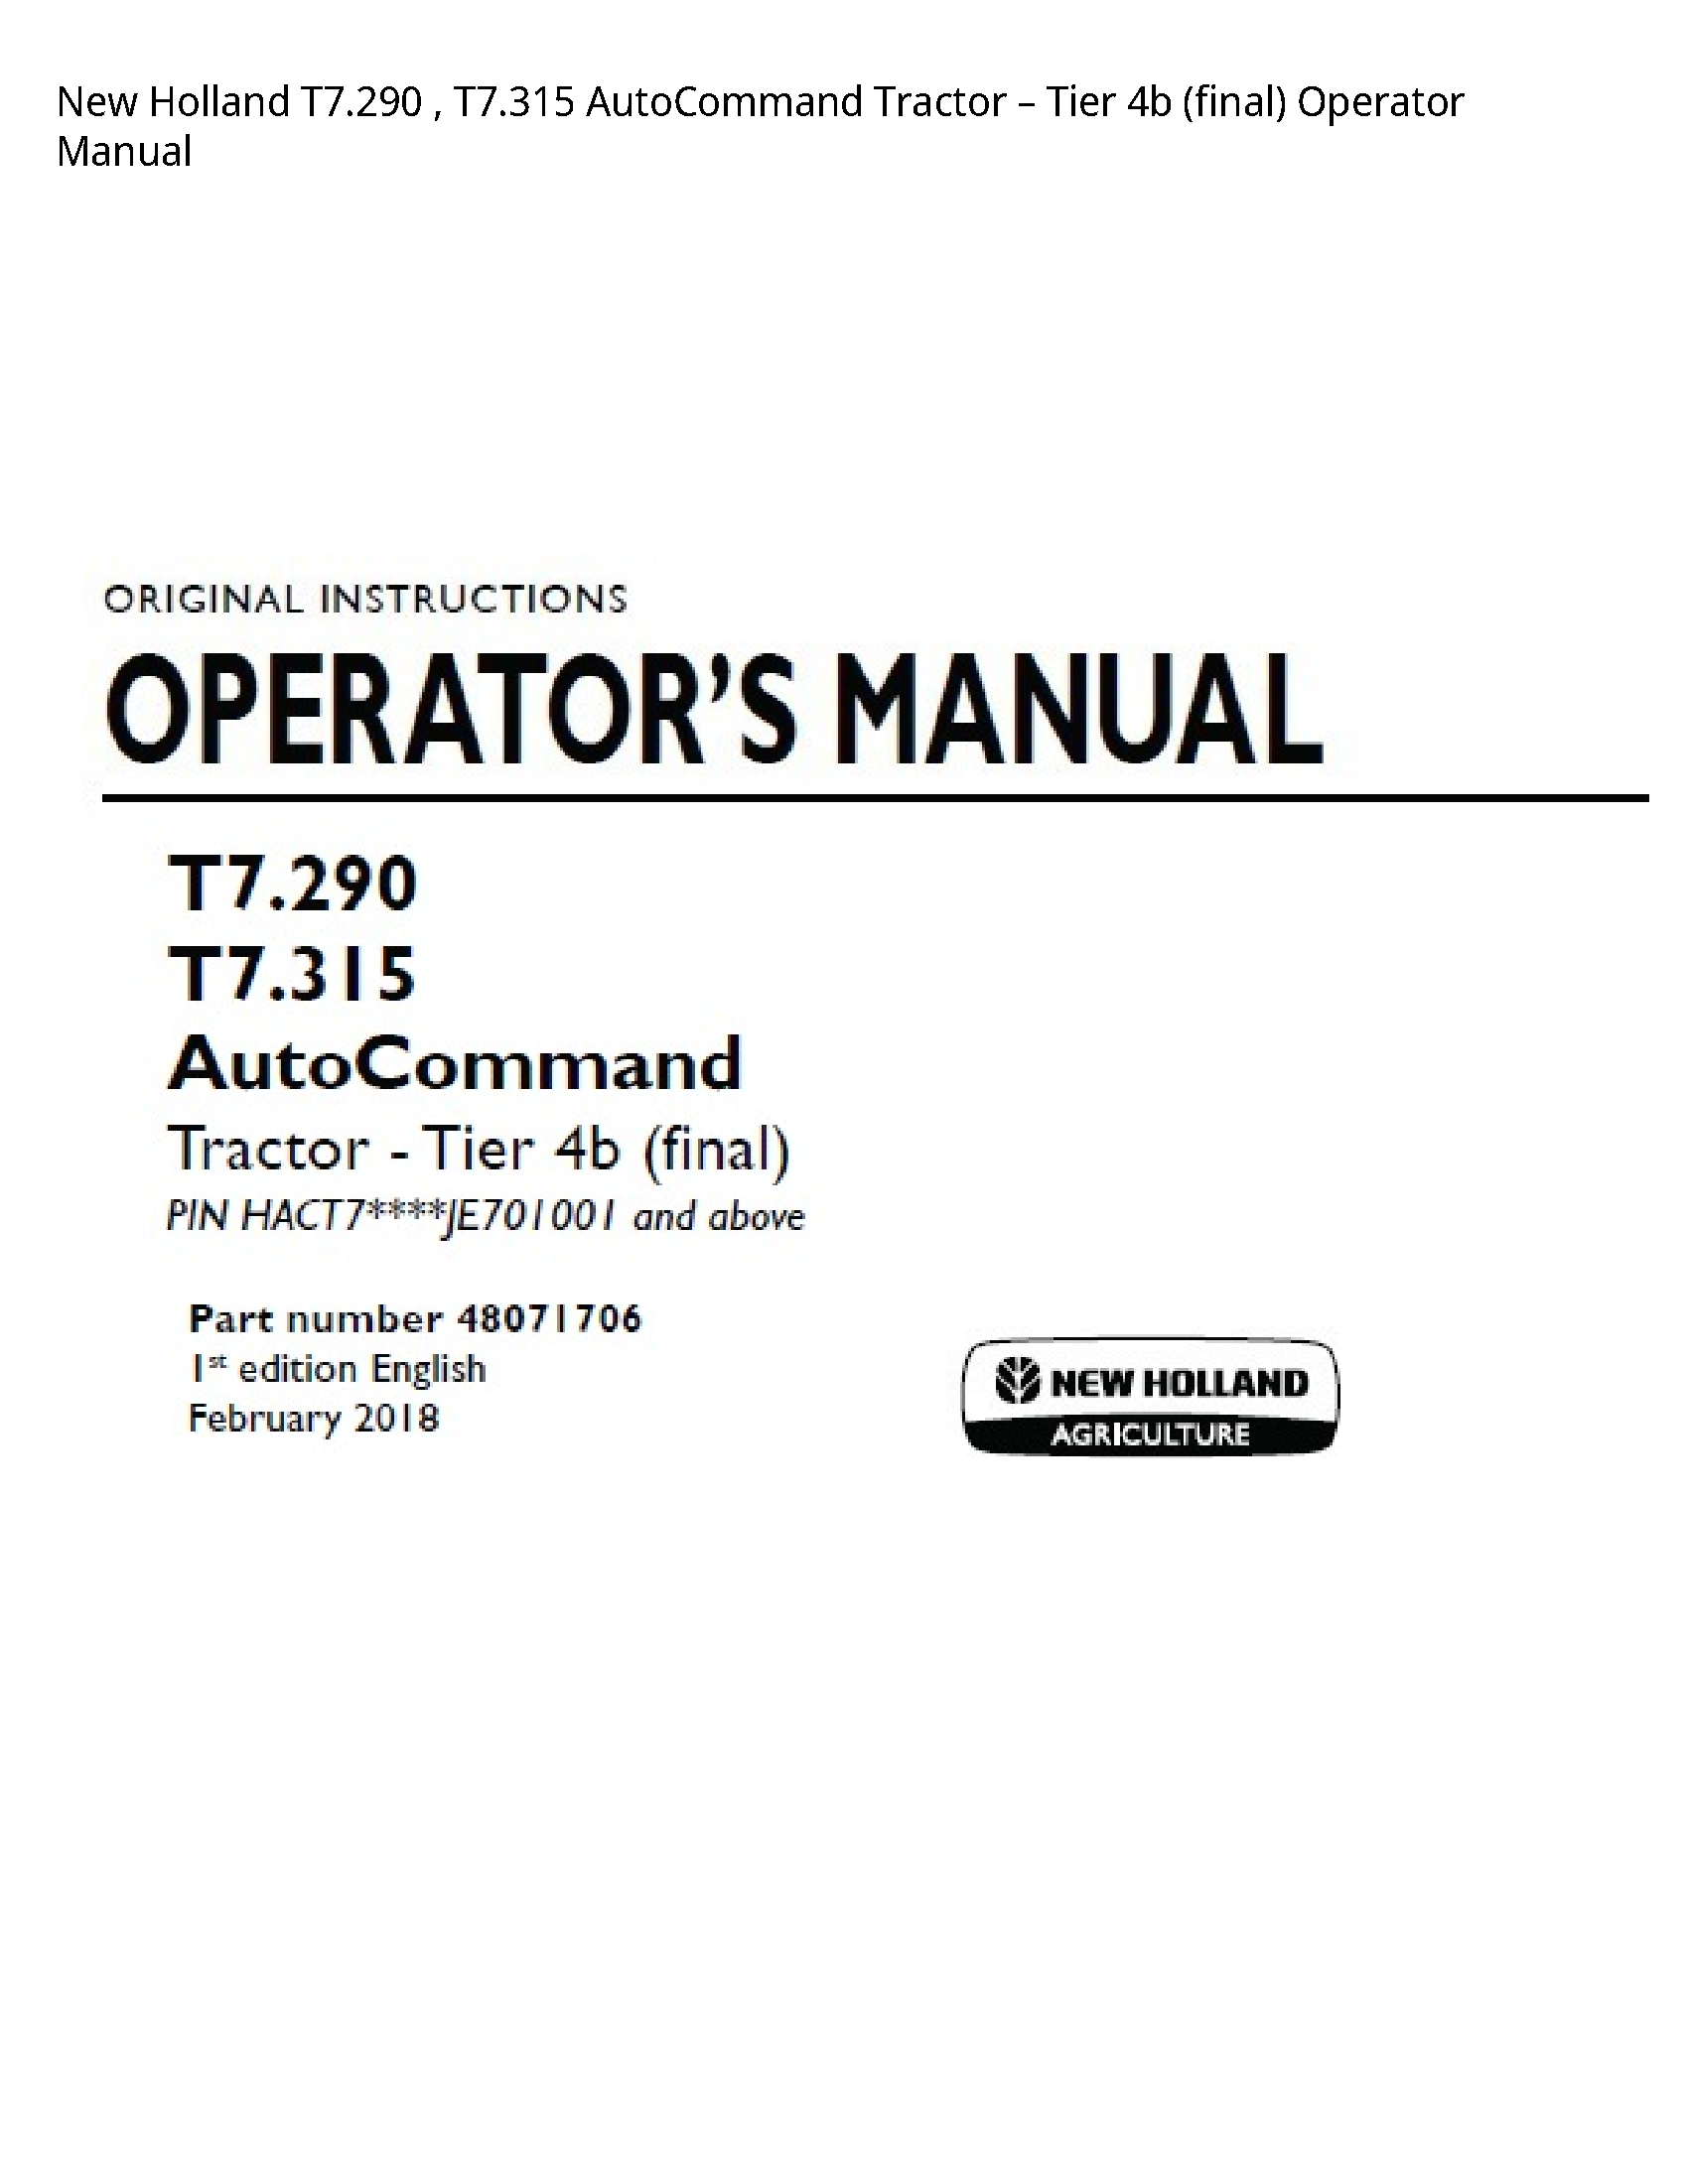 New Holland T7.290 AutoCommand Tractor Tier (final) Operator manual